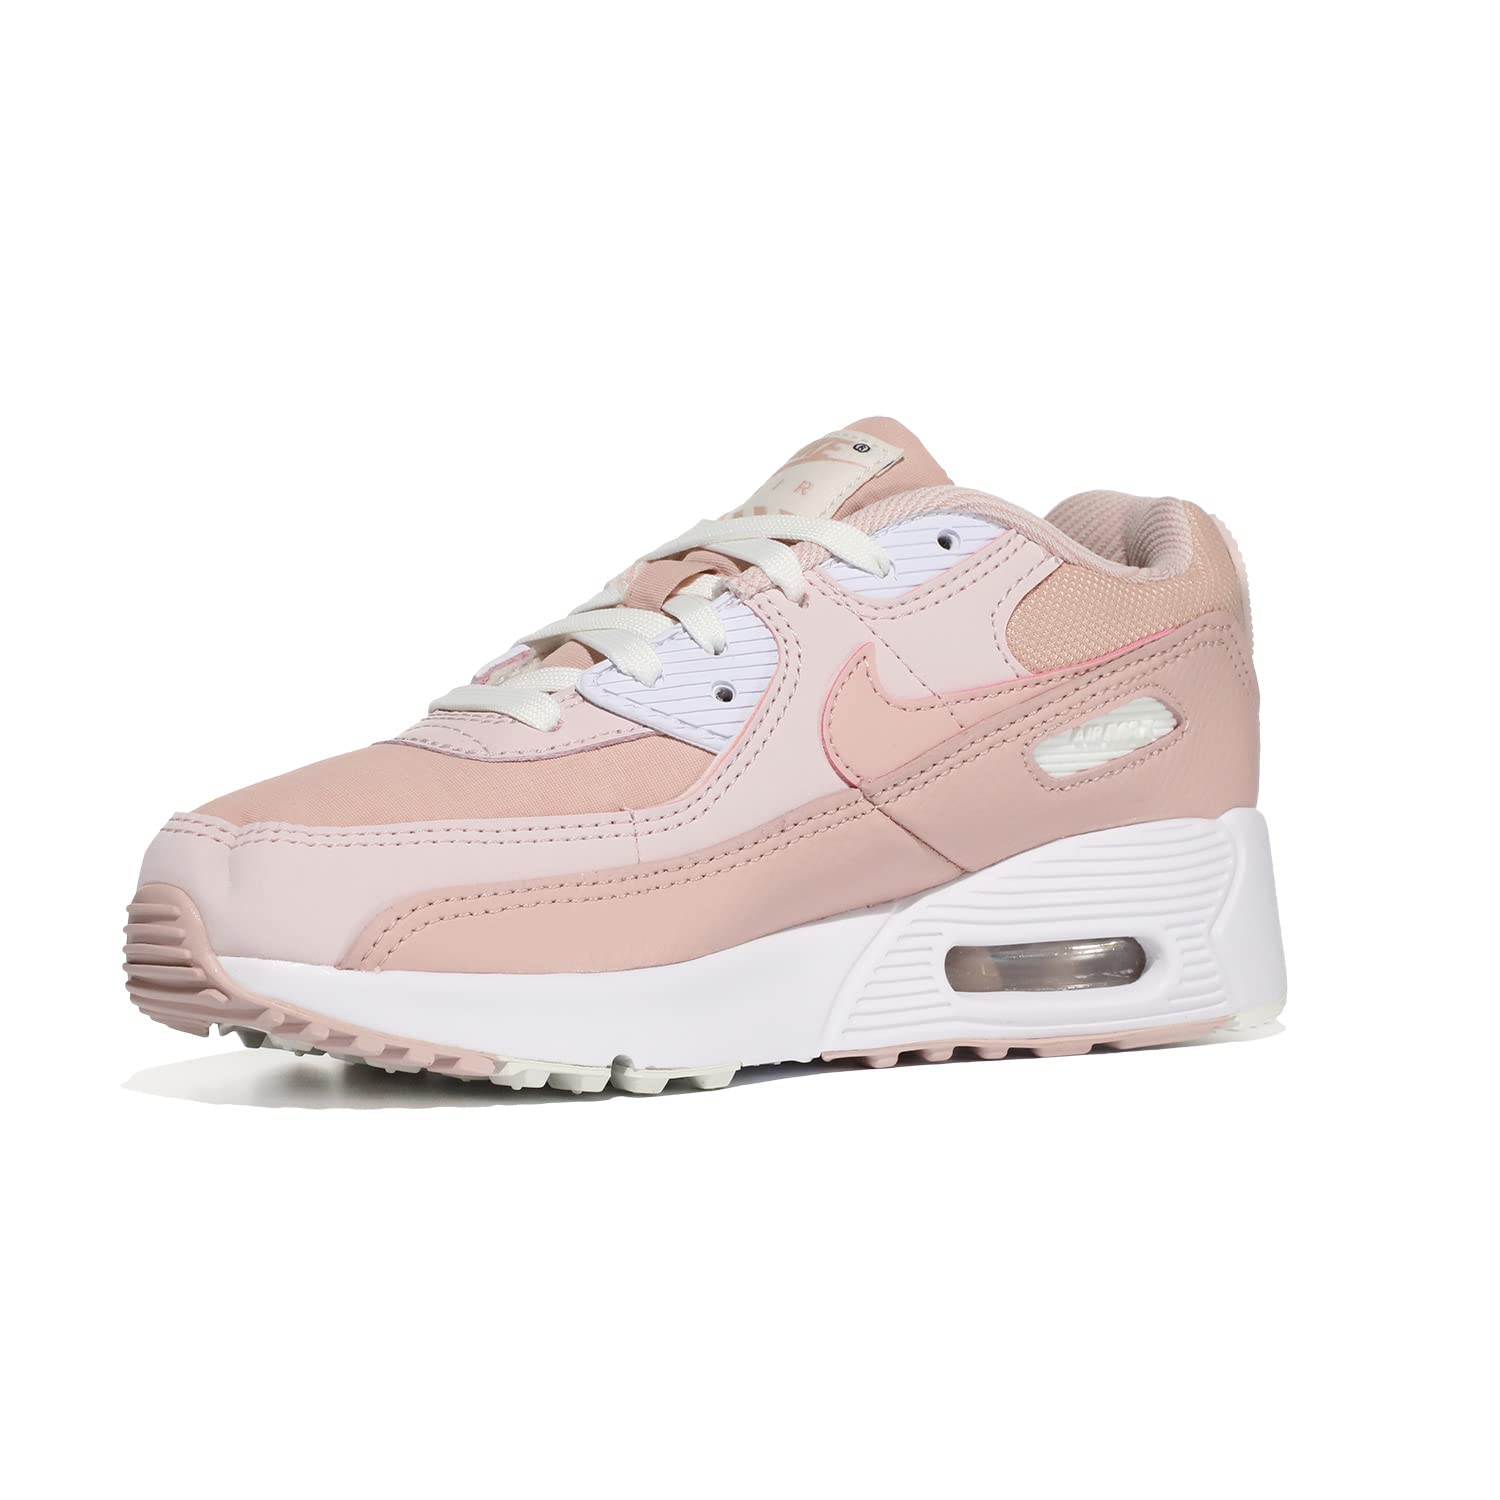 Image 2 of Air Max 90 LTR (Little Kid)